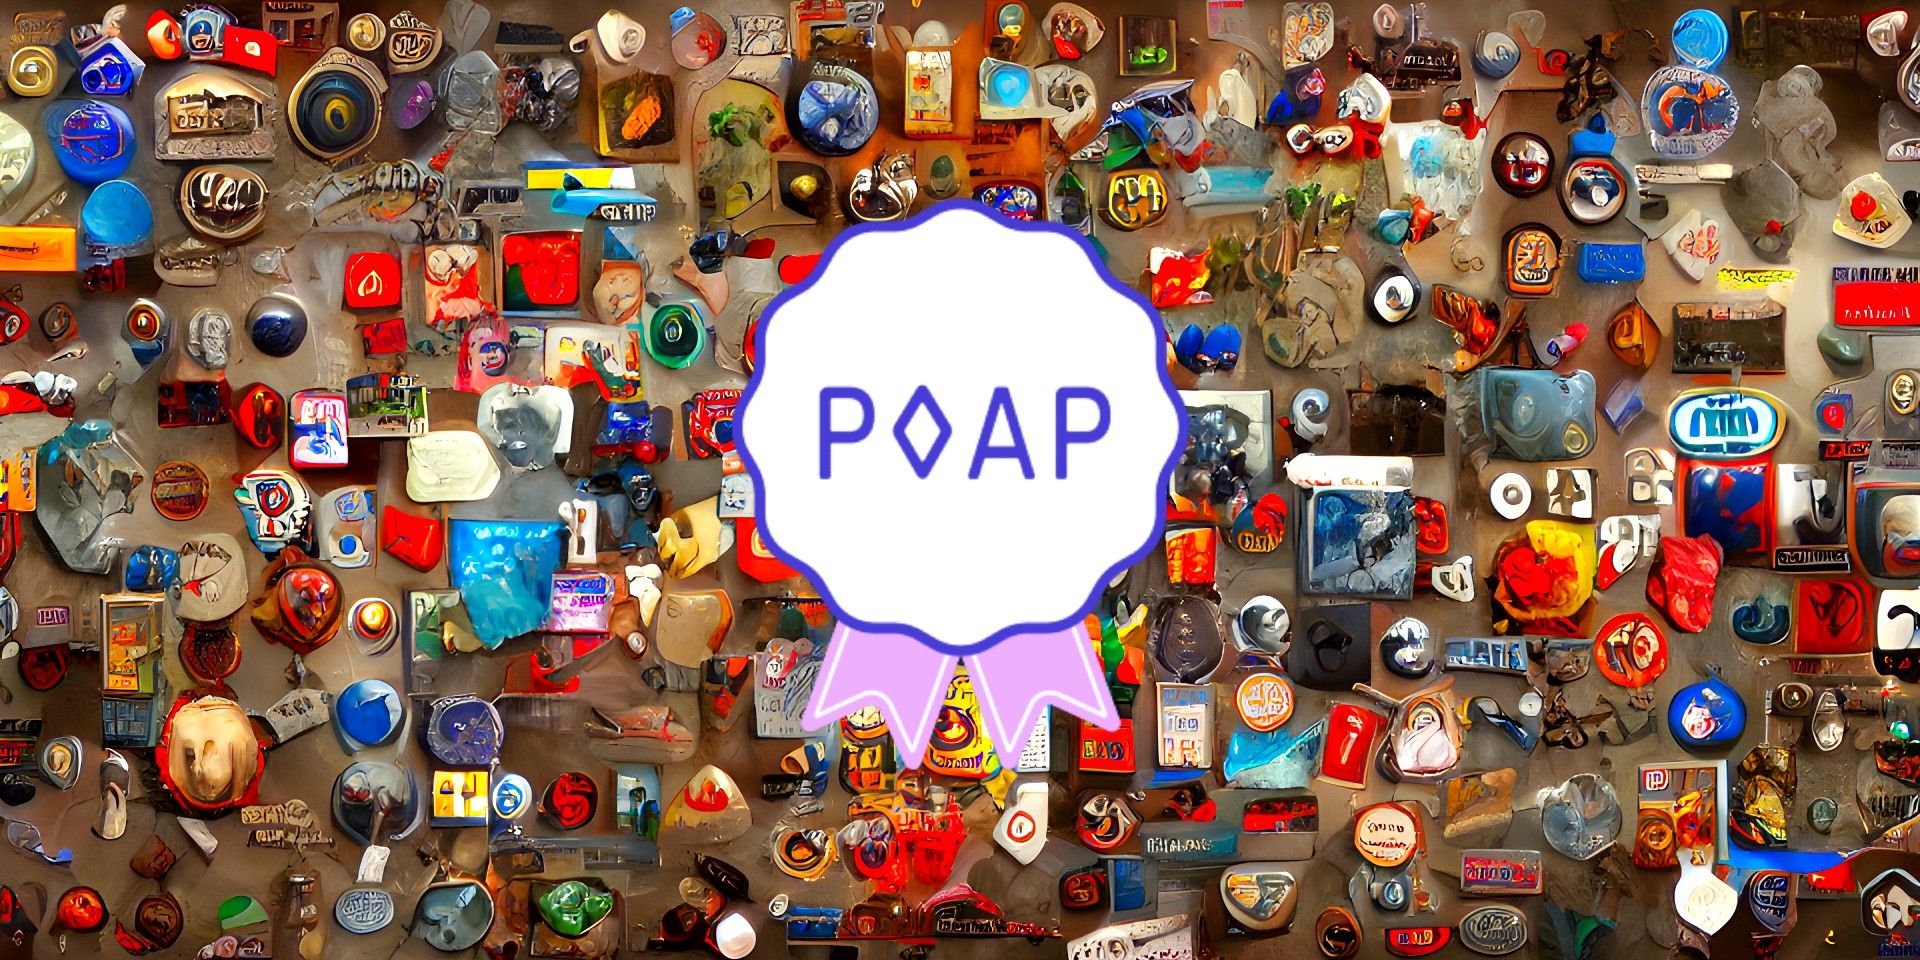 Wall covered in badges and decals with the POAP logo in center